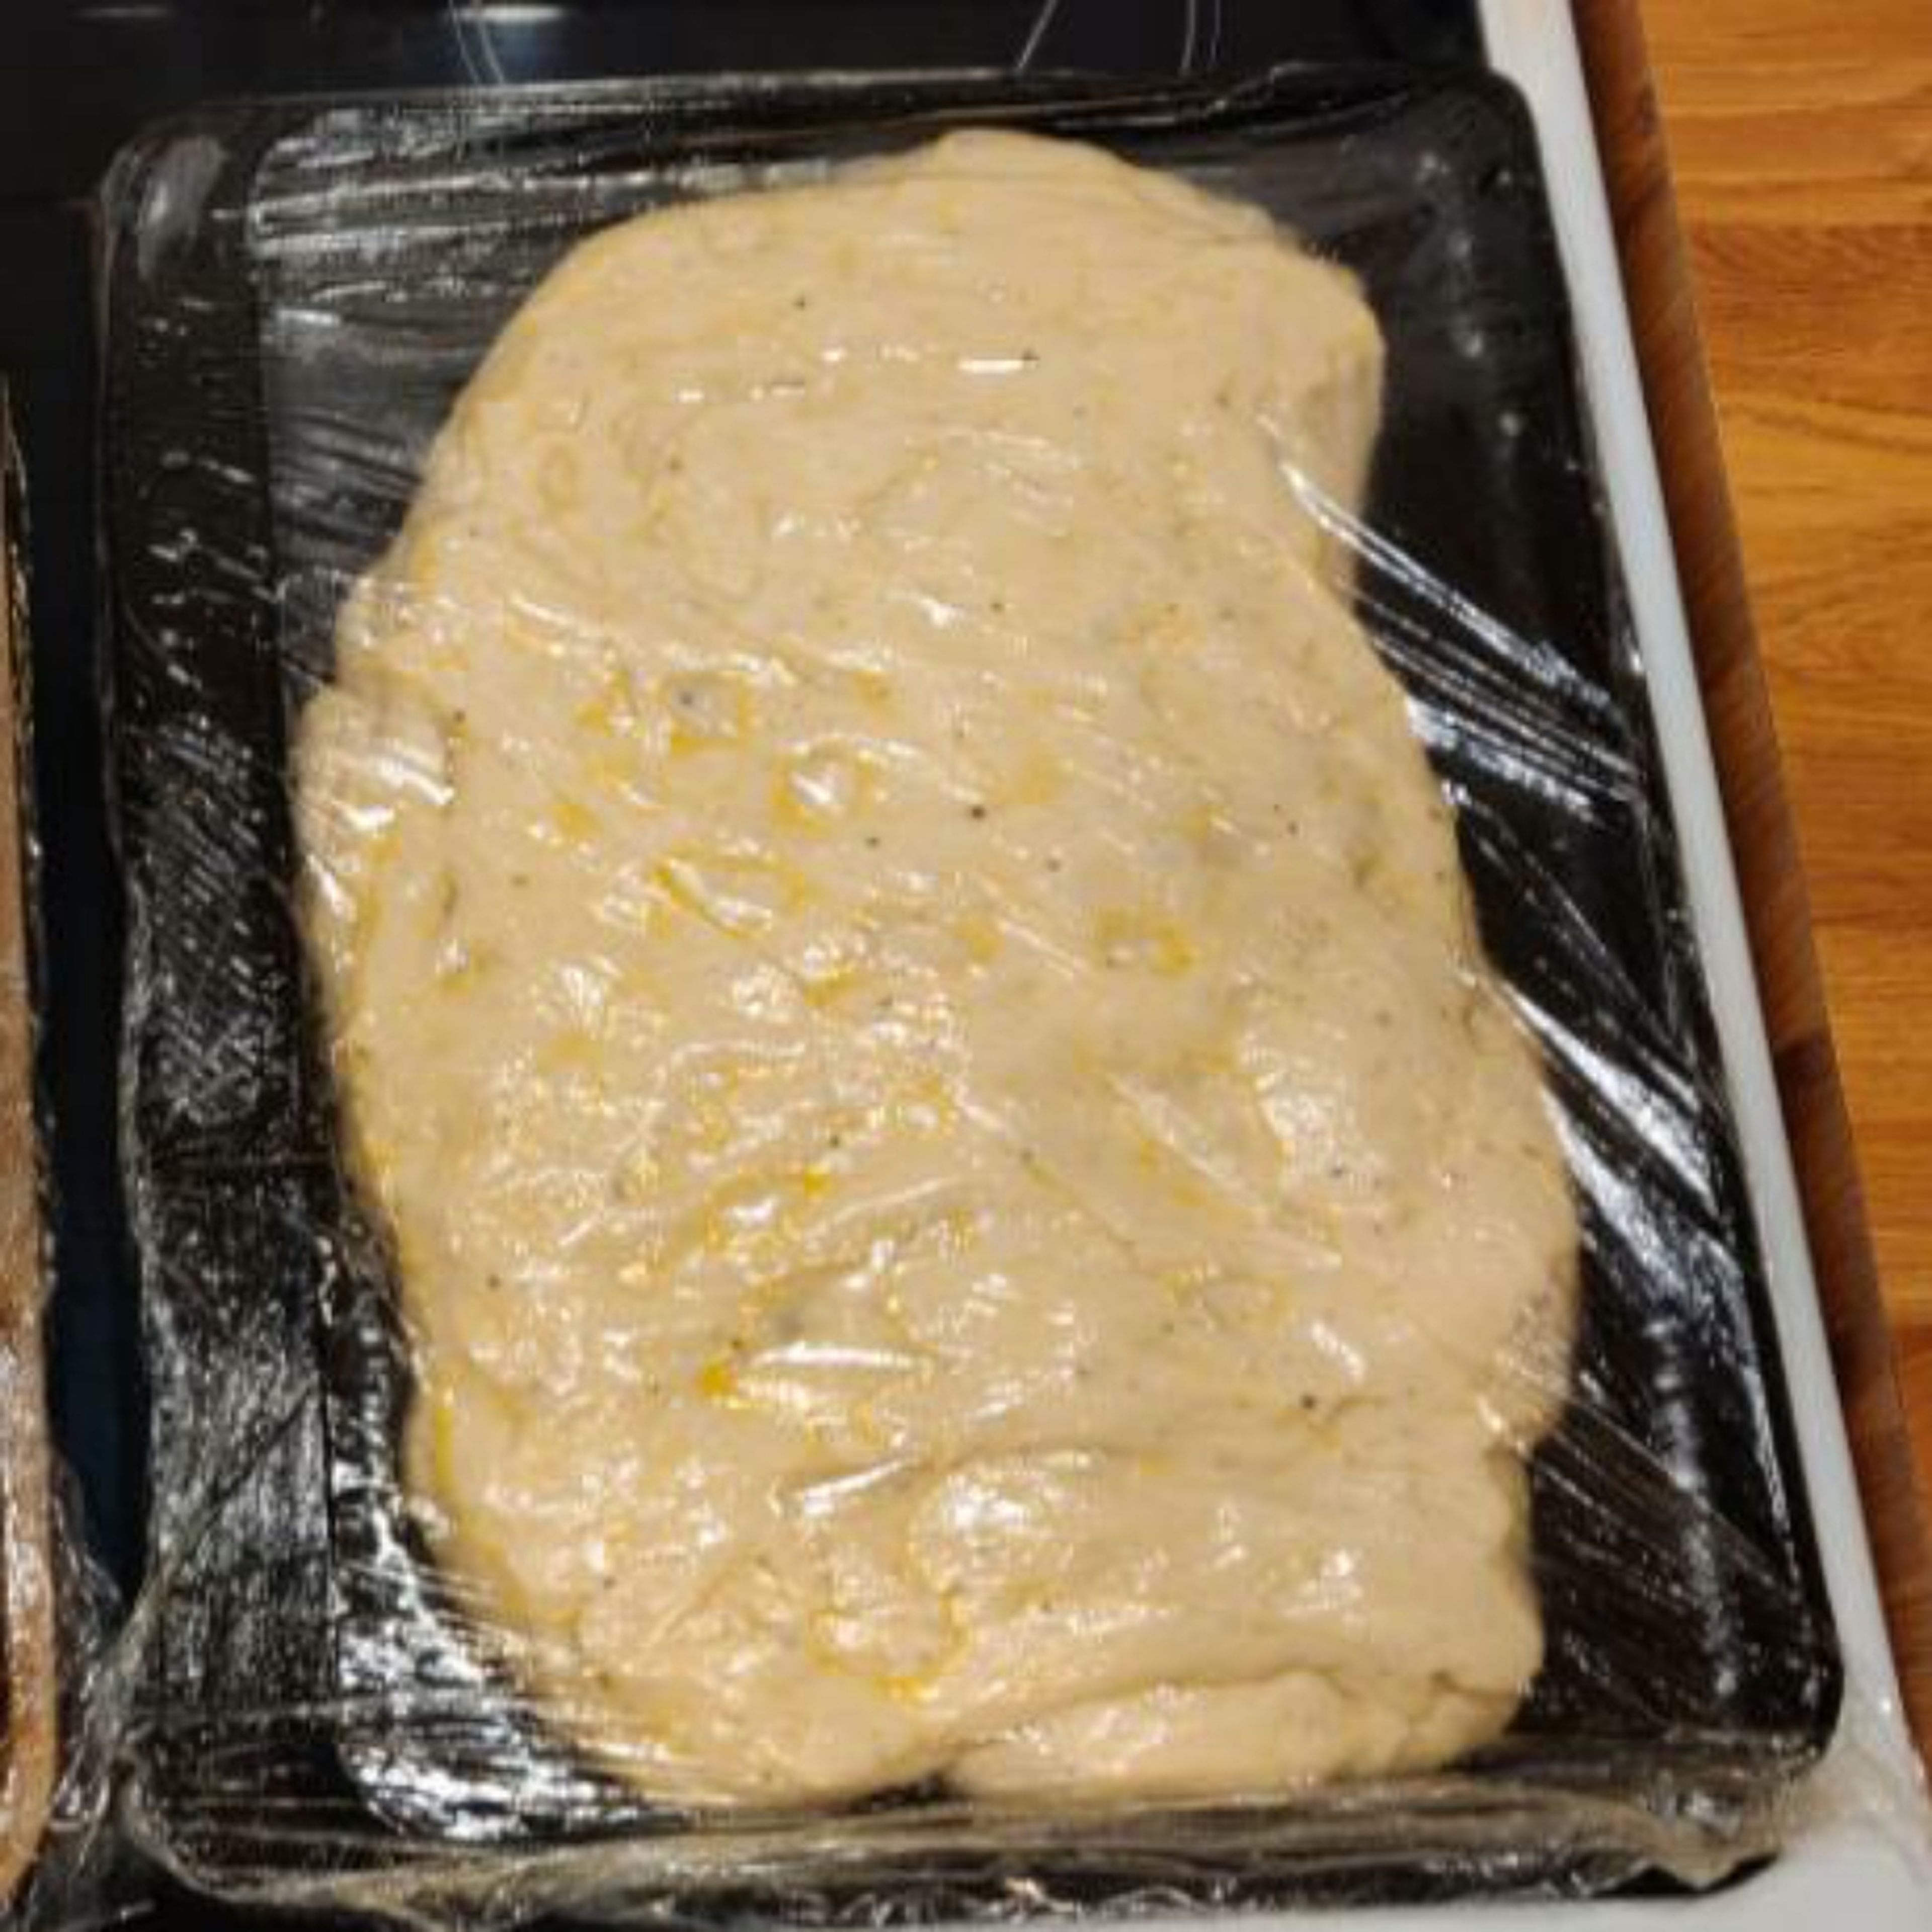 knock back the dough and place the dough into a well oiled baking sheet. stretch the dough to fit as much of the baking sheet as you can, but do not force it as this will get easier in the next step.